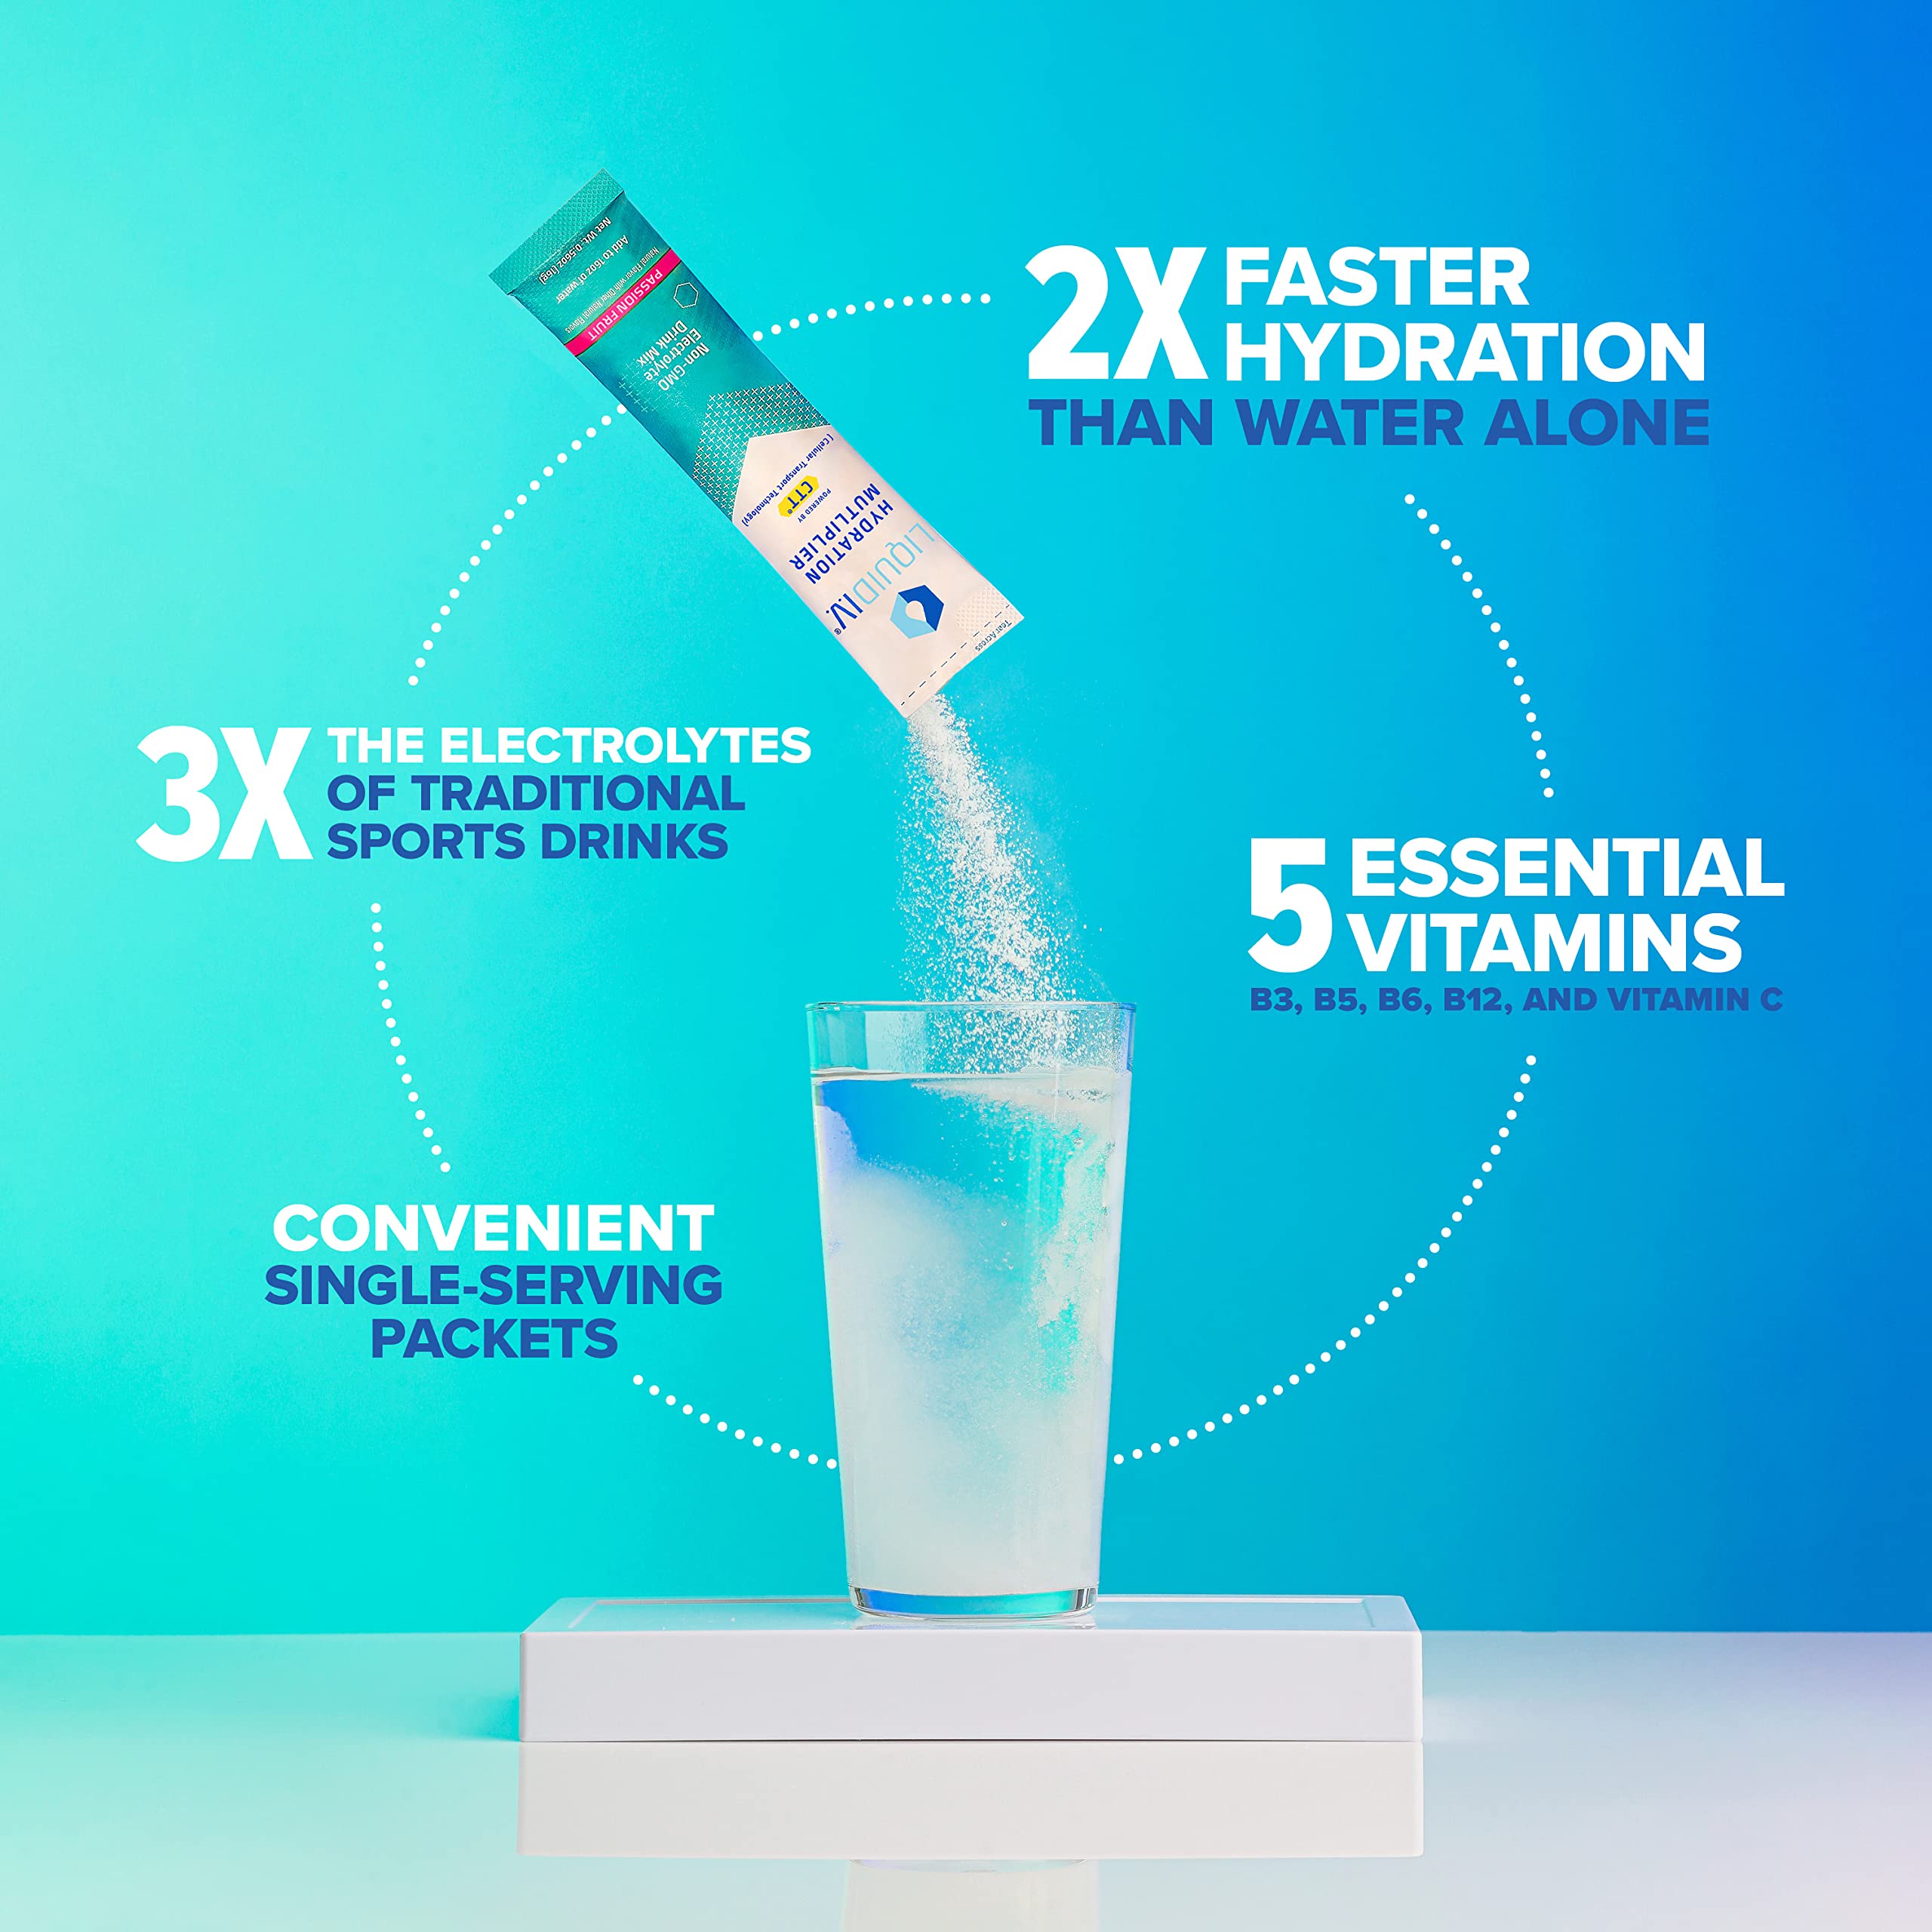 Liquid I.V. Hydration Multiplier - Passion Fruit - Hydration Powder Packets | Electrolyte Drink Mix | Easy Open Single-Serving Stick | Non-GMO | 192 Sticks